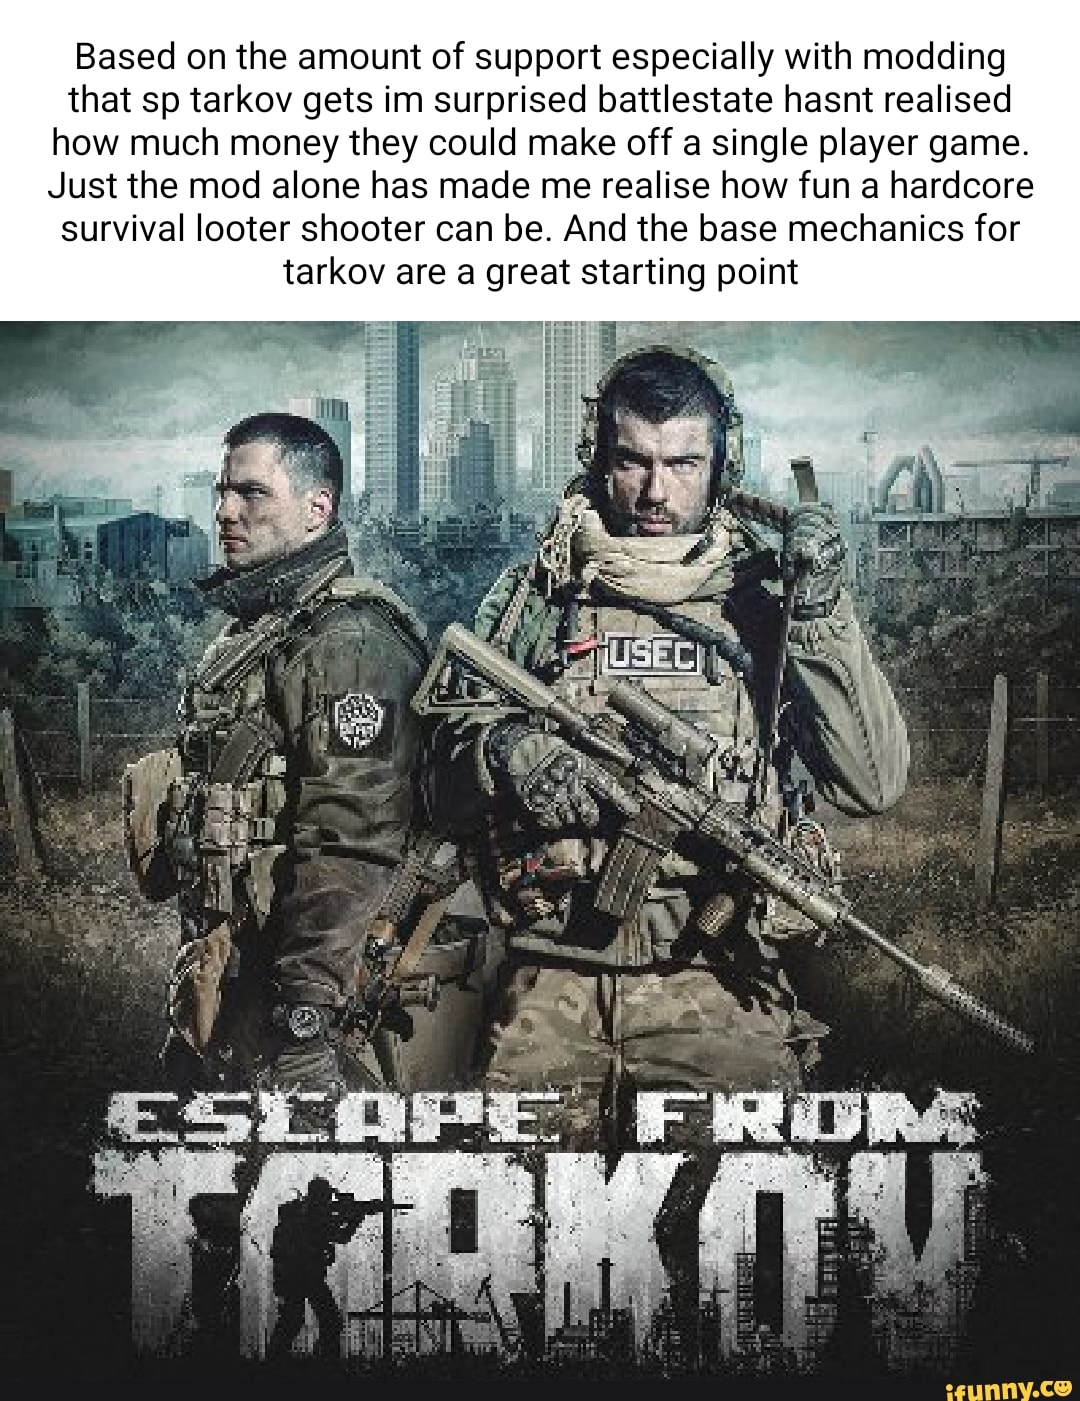 Based on the amount of support especially with modding that sp tarkov gets  im surprised battlestate